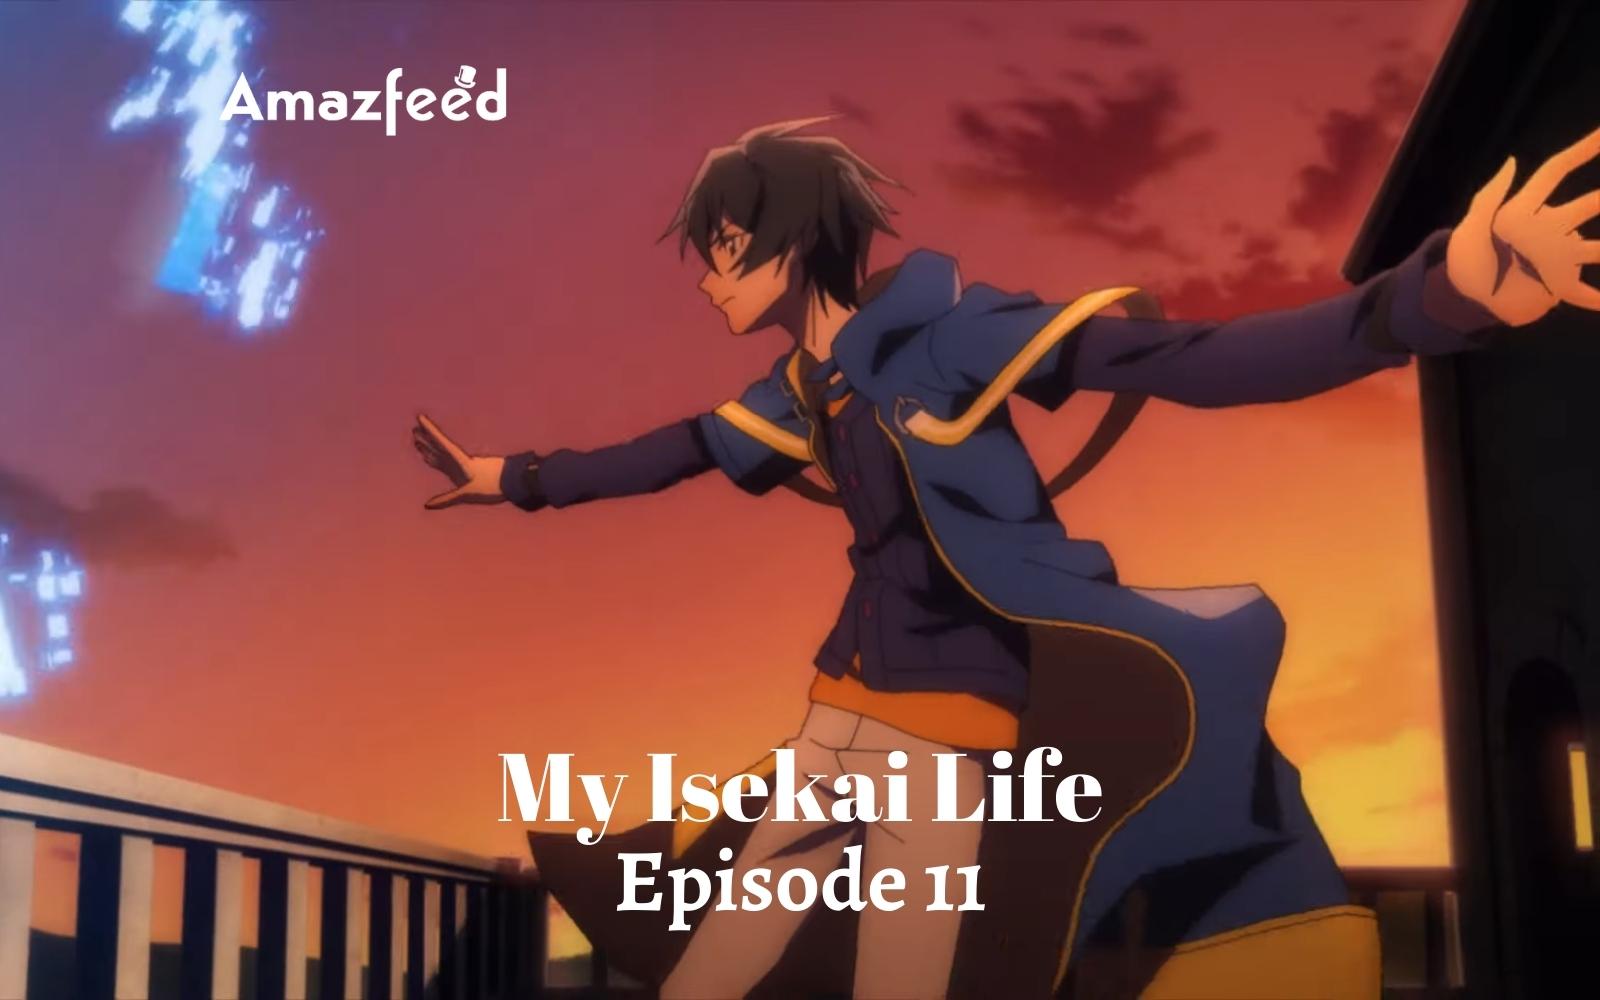 My Isekai Life Episode 11 : Countdown, Release Date, Spoiler, Premiere Time, Where to Watch, Recap & Cast